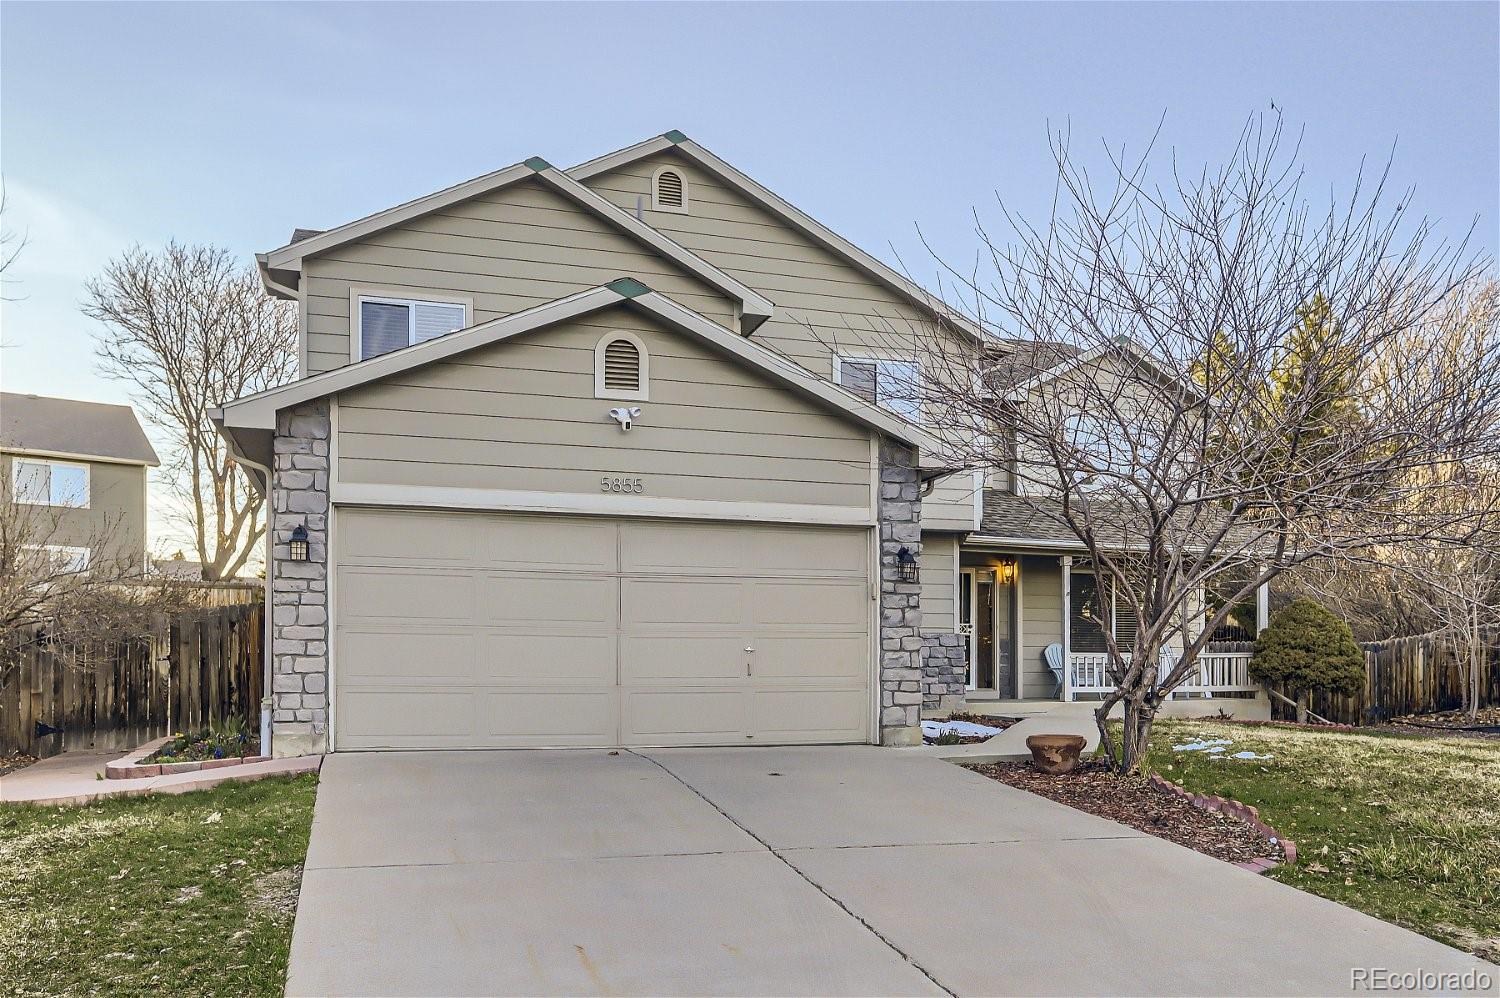 Report Image for 5855 W 112th Place,Westminster, Colorado